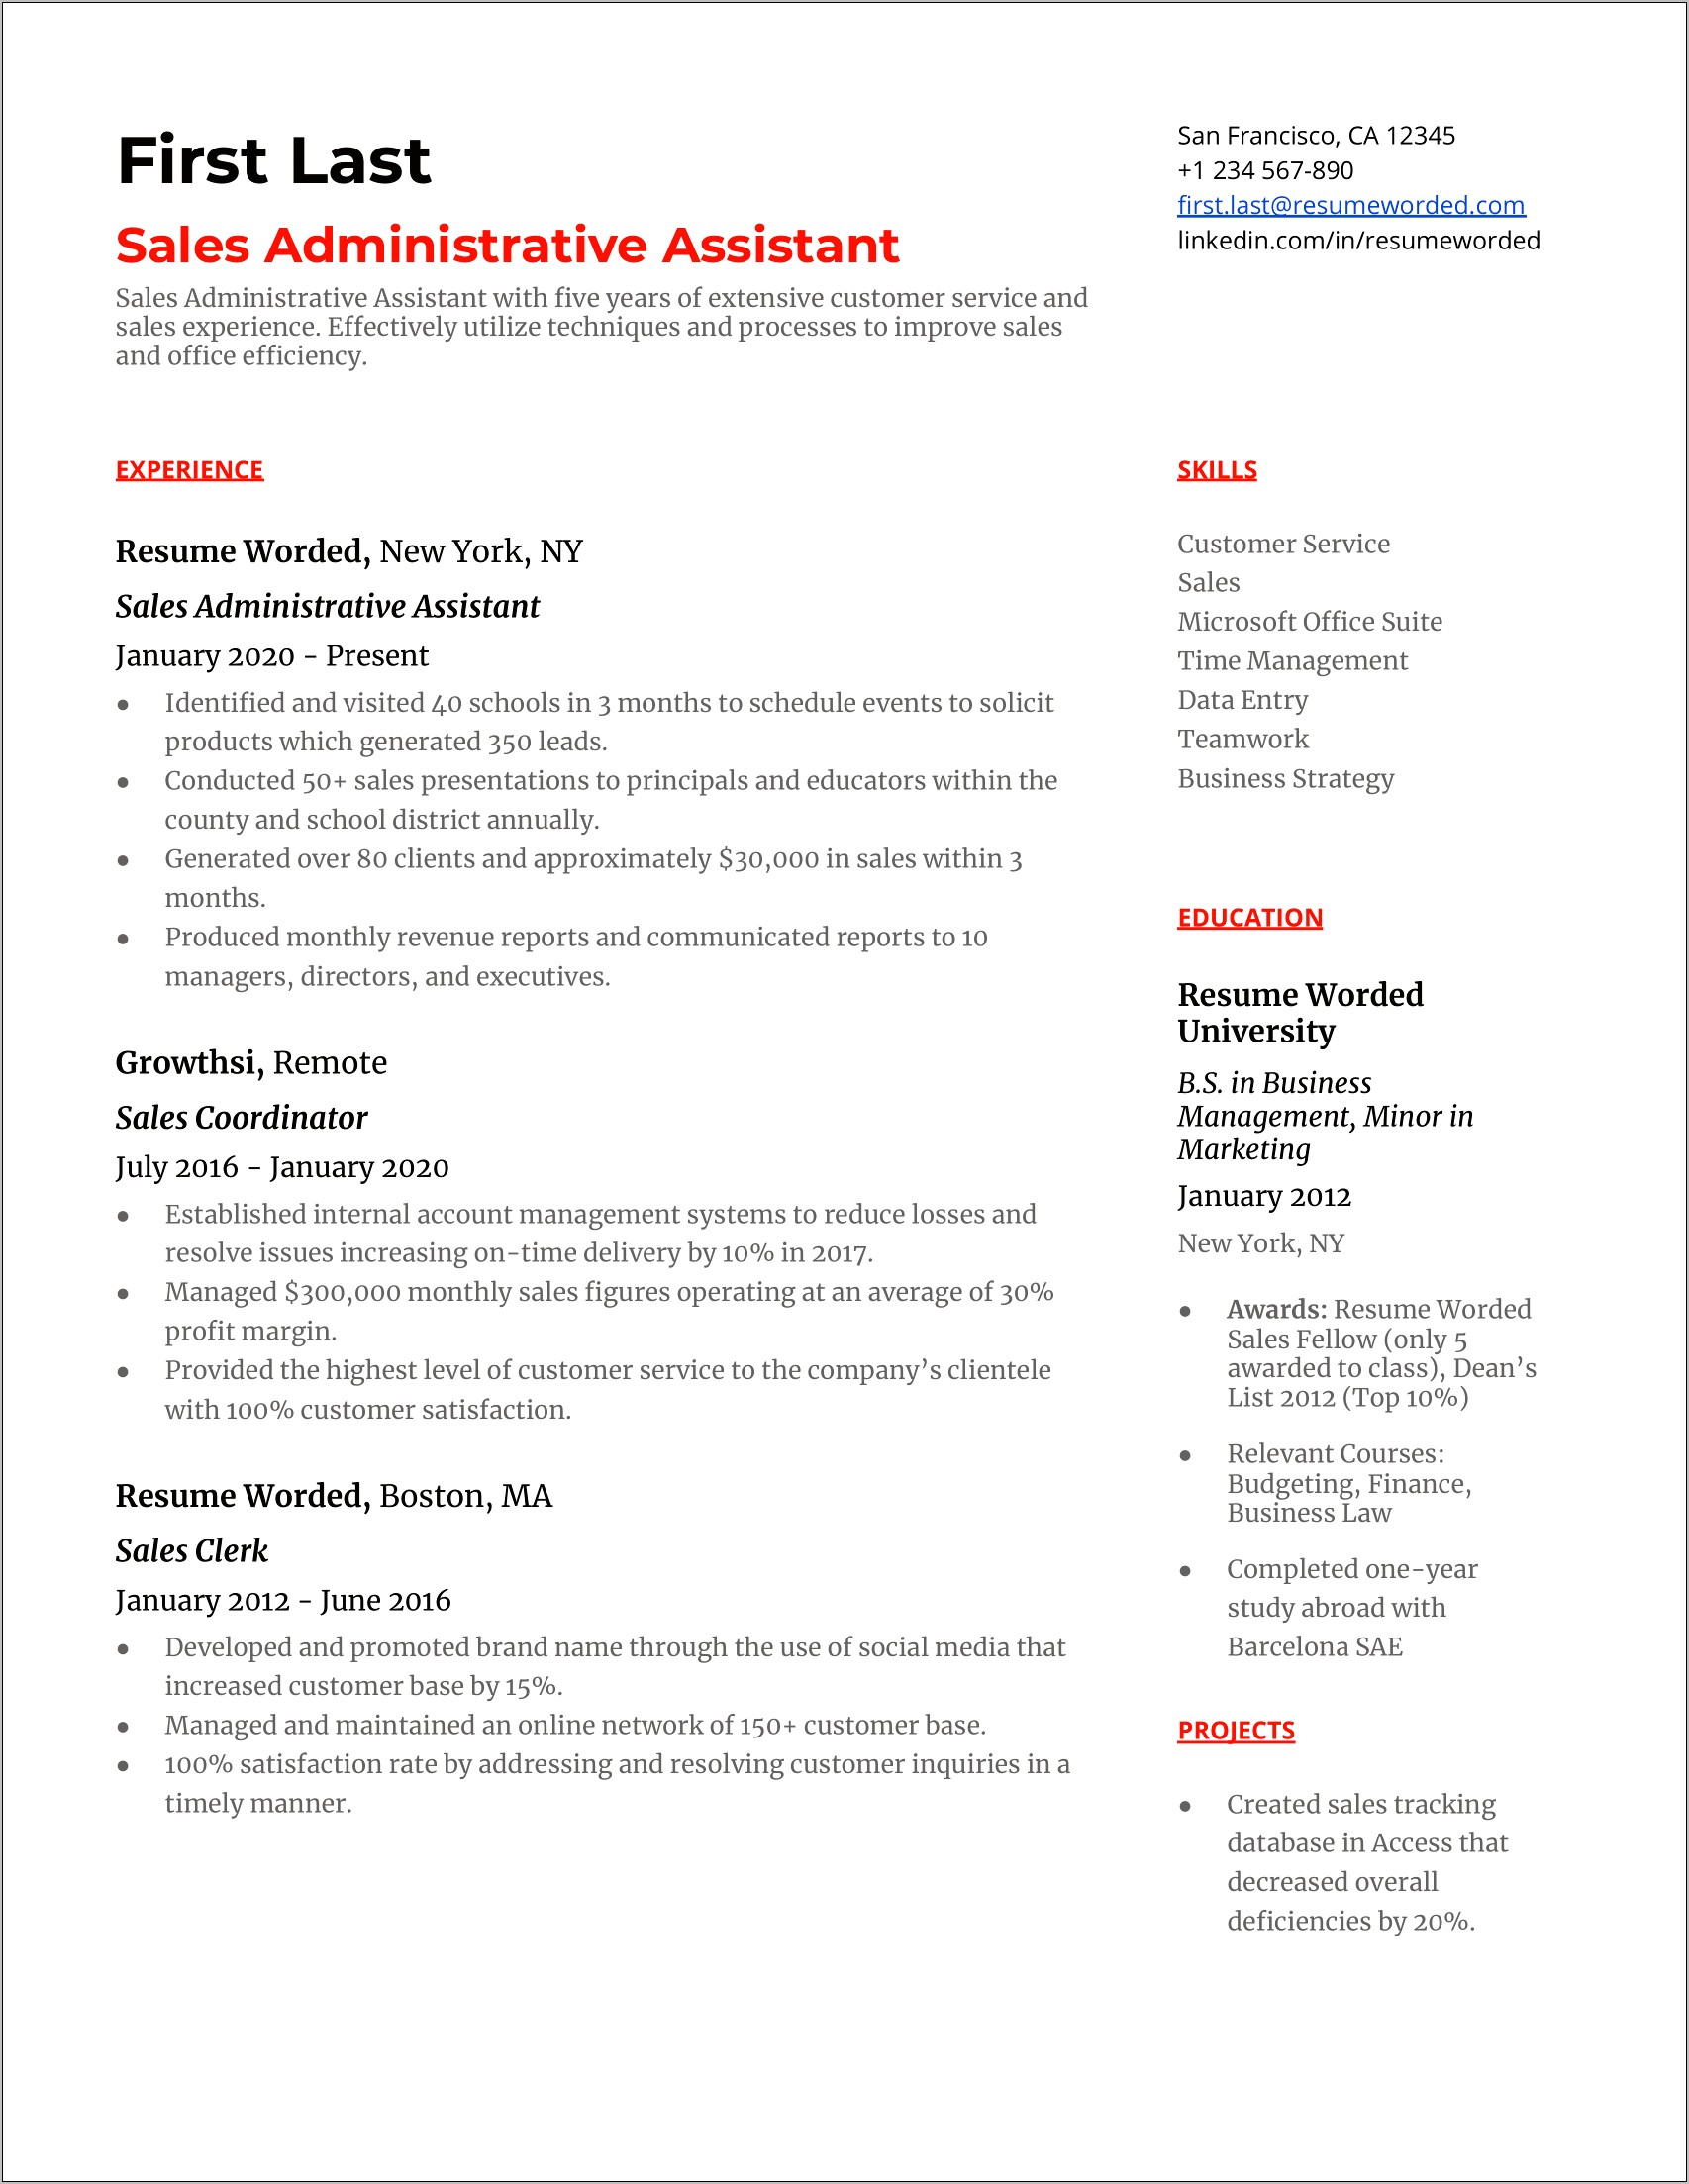 Resume Objective For Administative Assistance